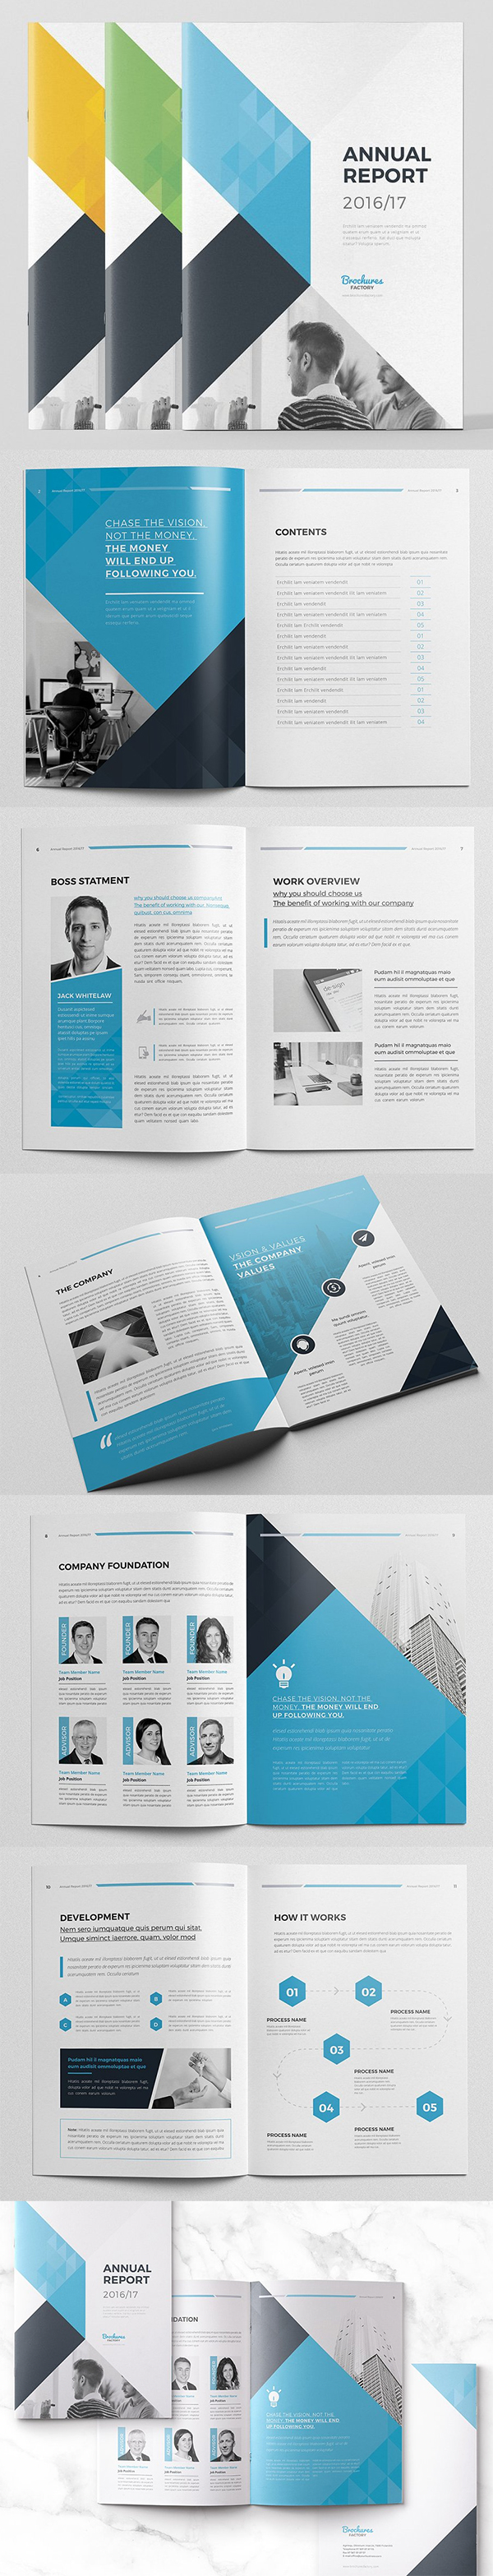 Best Annual Report Template